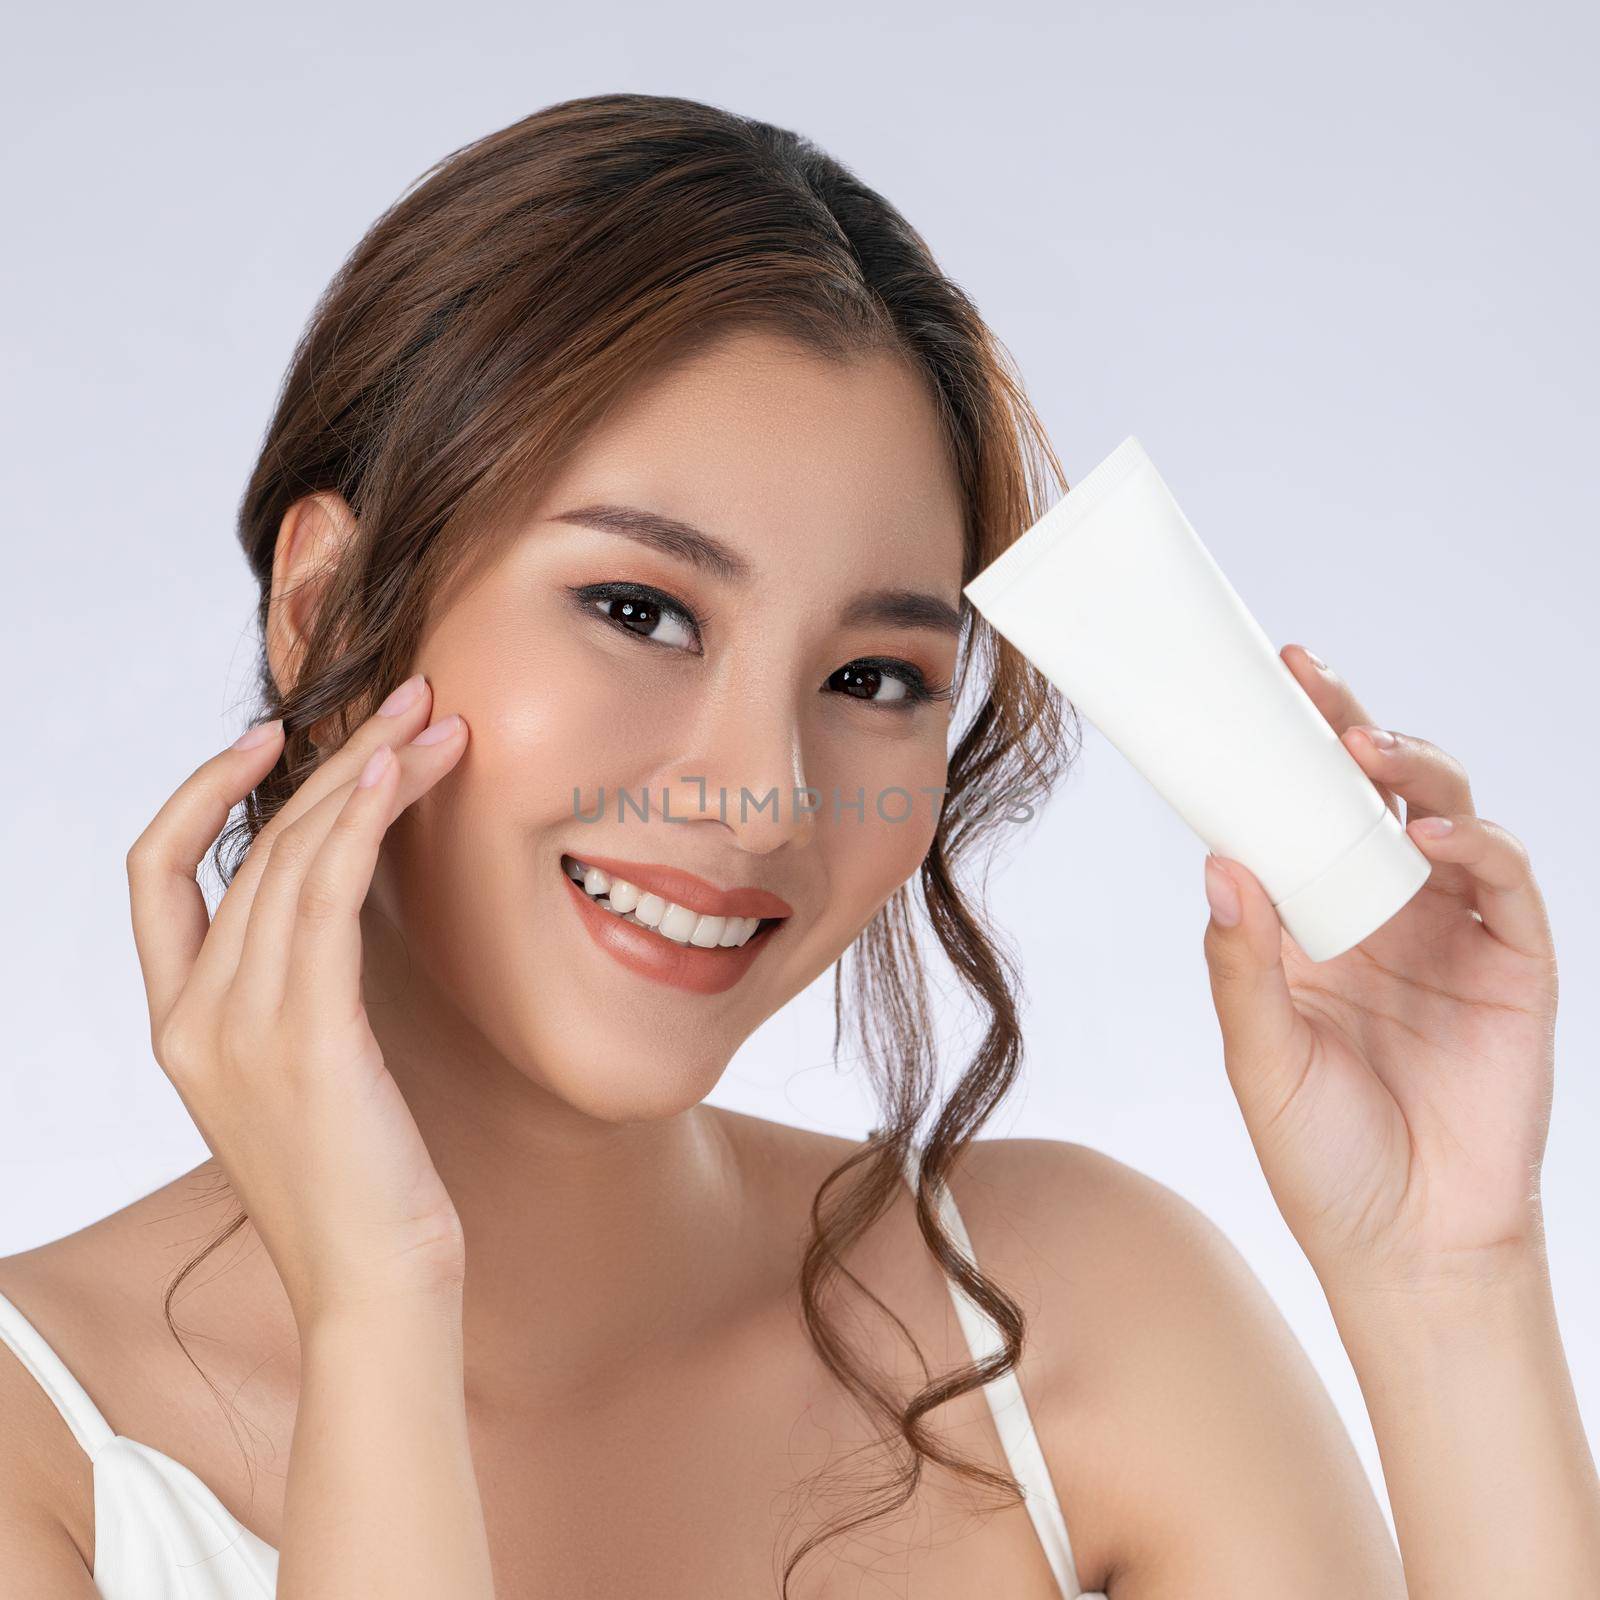 Gorgeous woman with makeup smiling holding mockup product for advertising text place, light grey background. Advertising concept for skin healthcare and beauty care products.